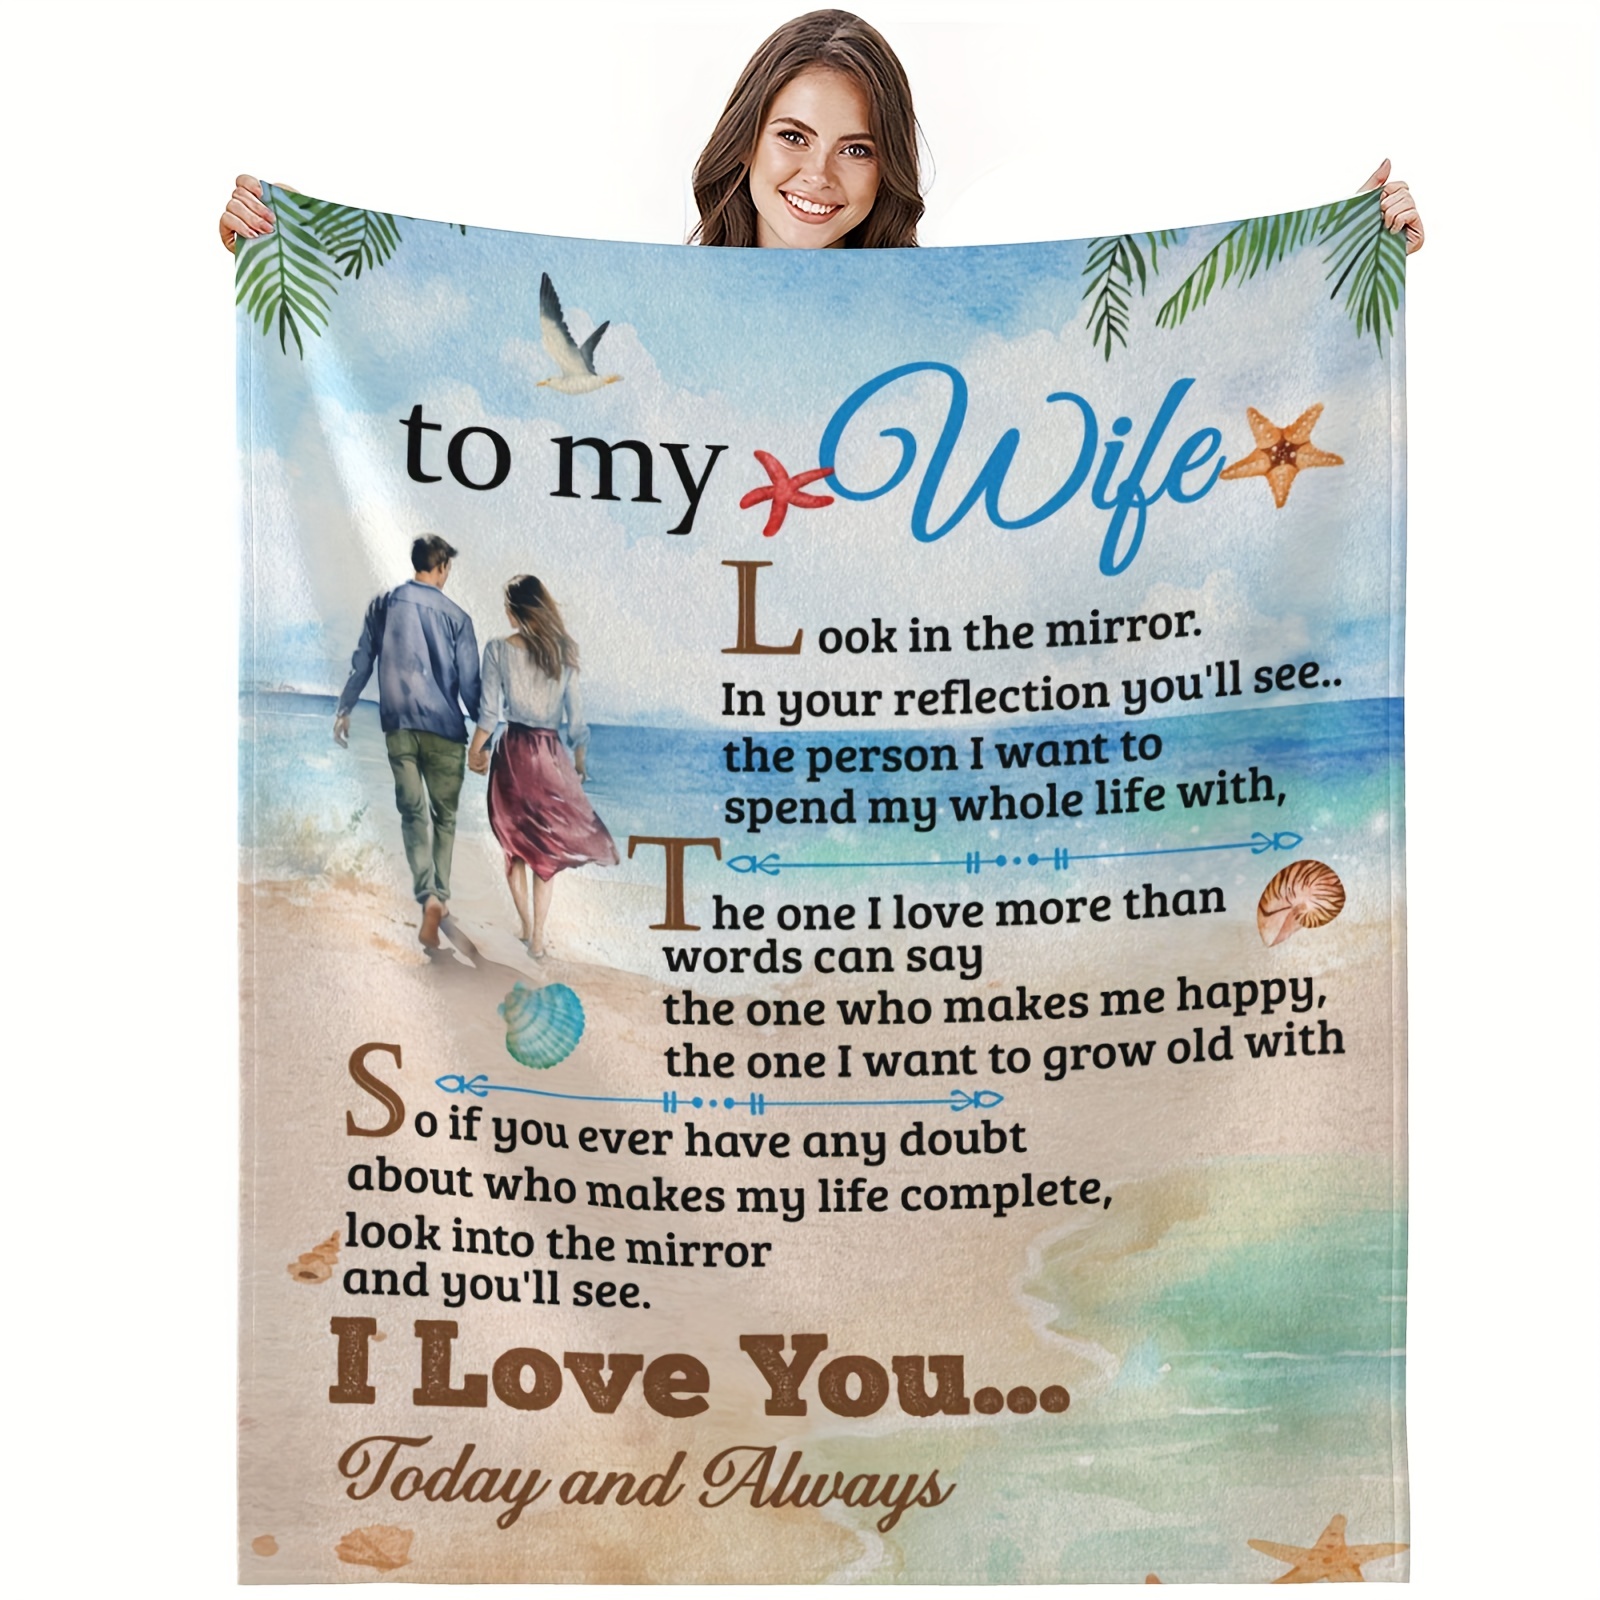 1pcs Gifts For Wife - Birthday Gift Ideas For Wife, Mother's Day,  Valentine's Day, Wedding, Christmas Gifts For Wife From Husband, Romantic  Anniversar